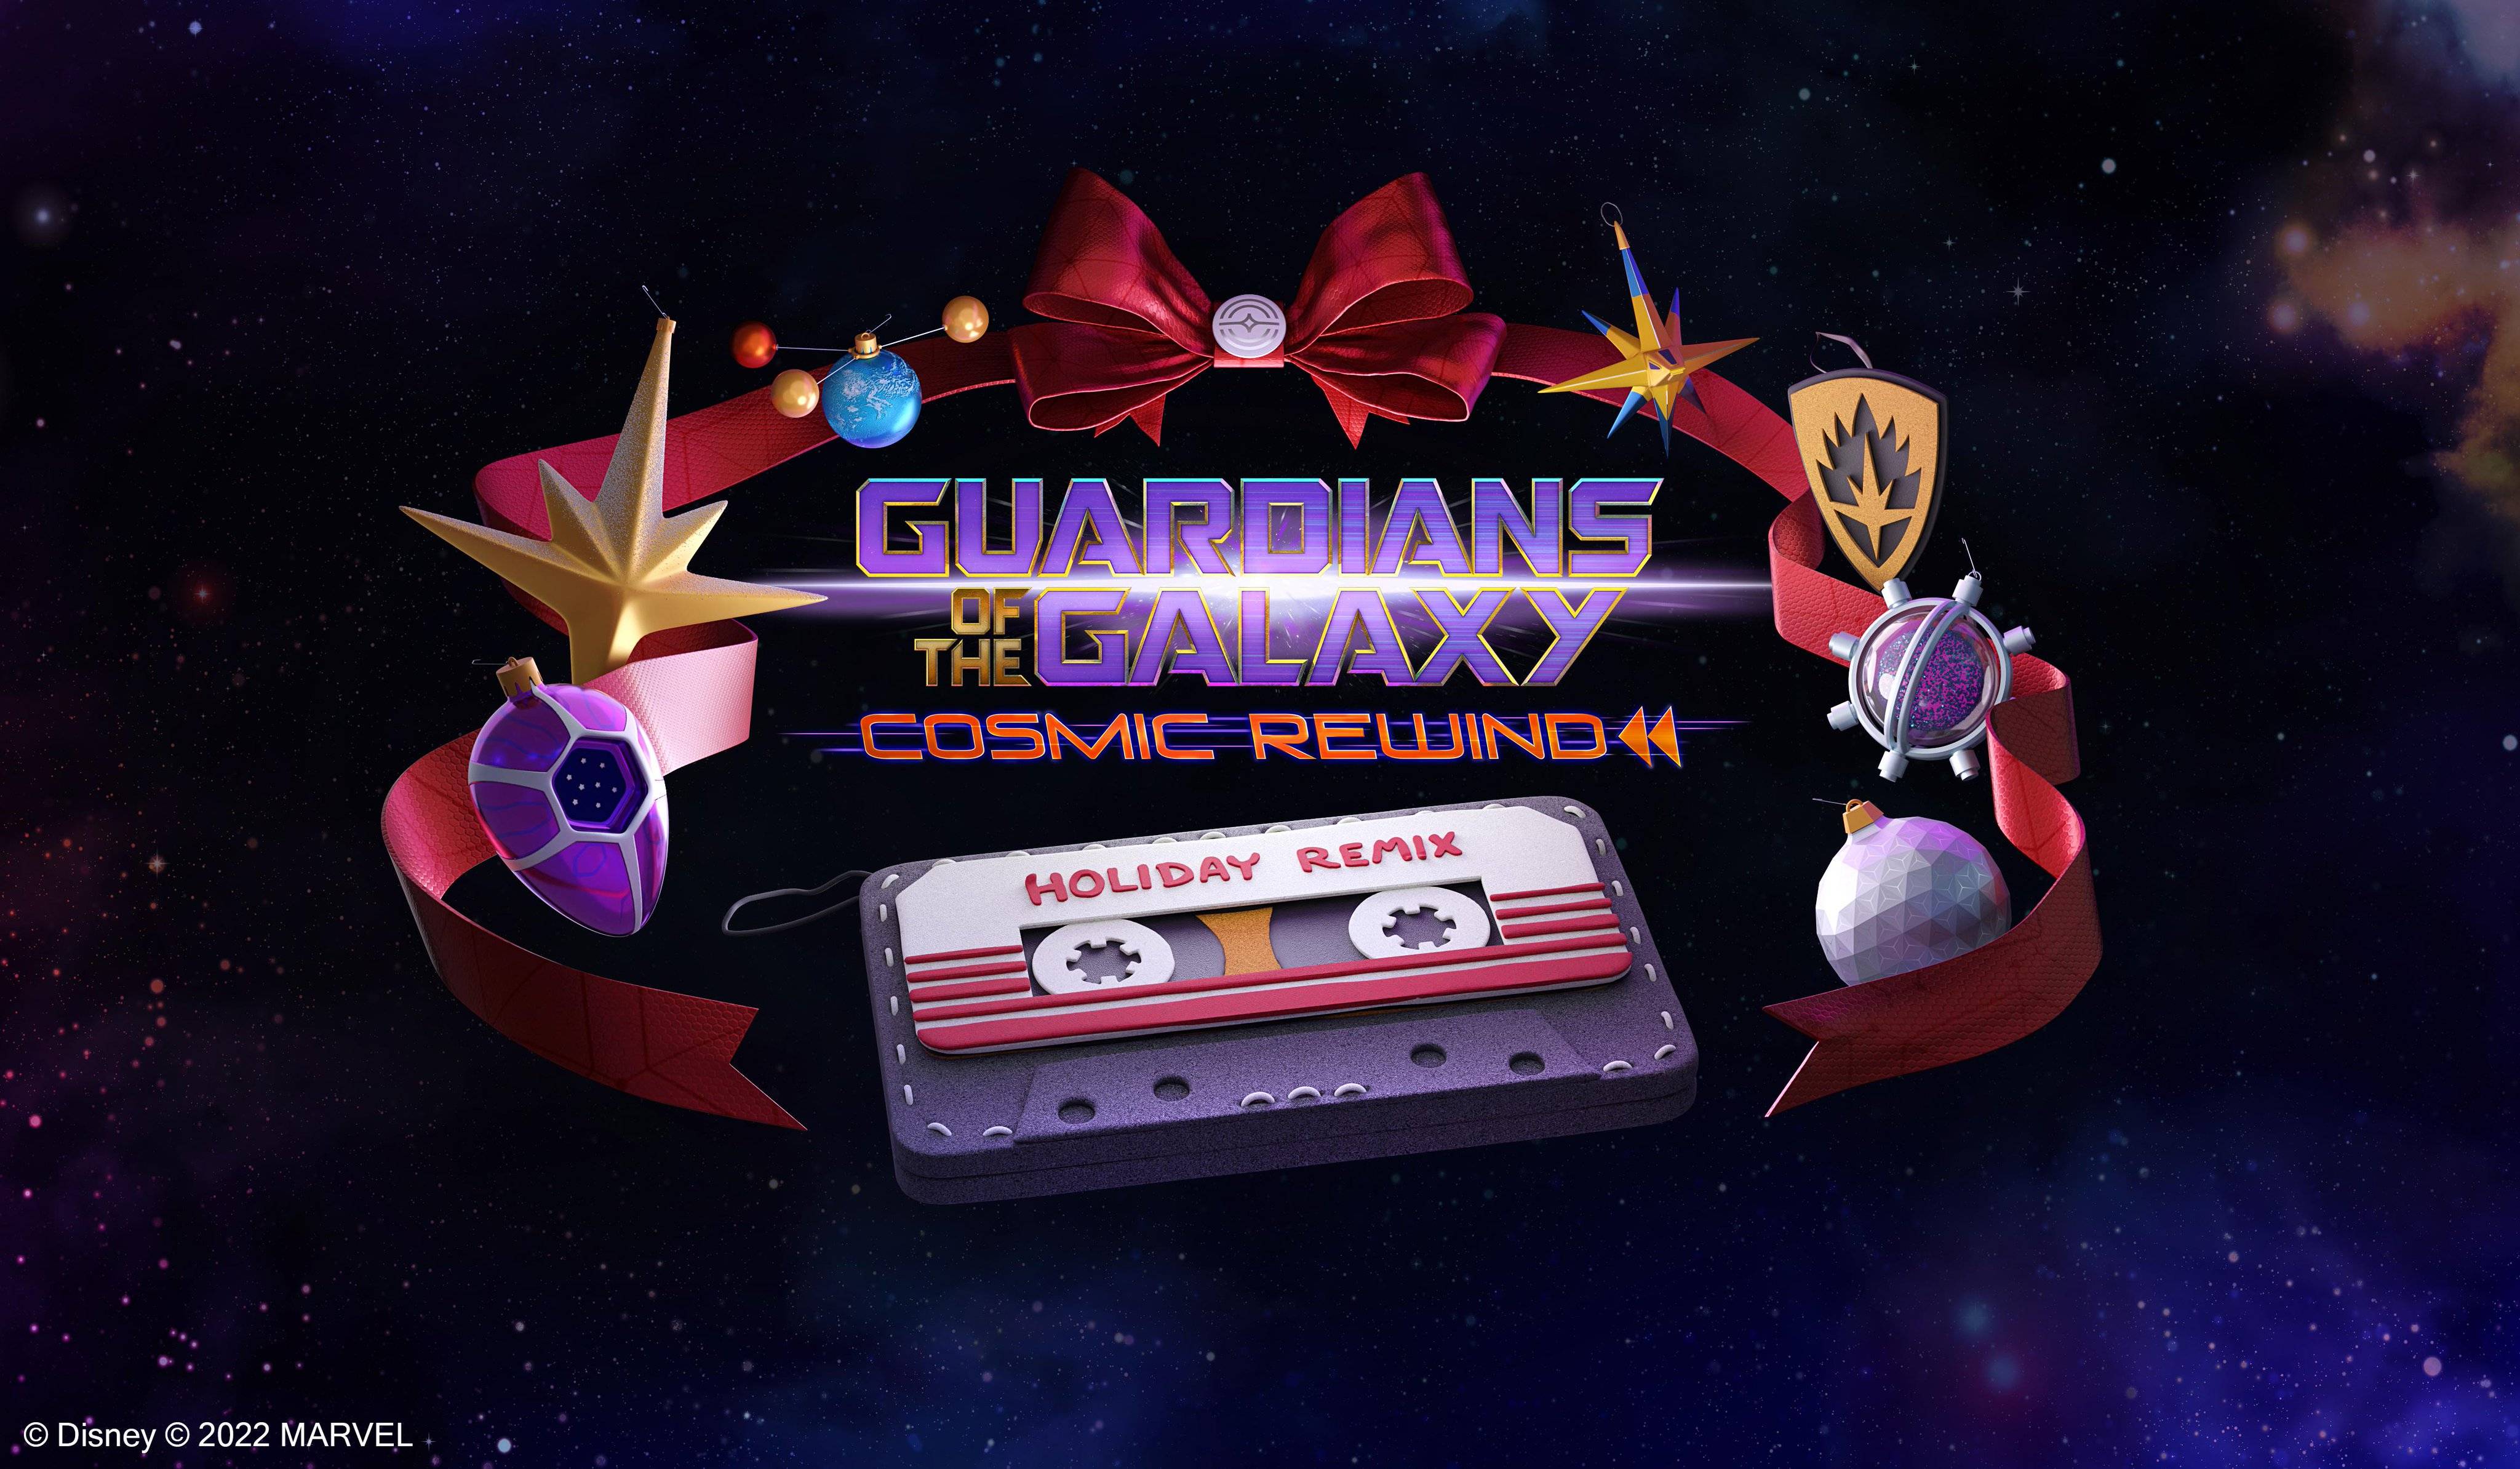 Take a ride aboard Disney World’s new Guardians of the Galaxy Cosmic Rewind Holiday Remix at EPCOT